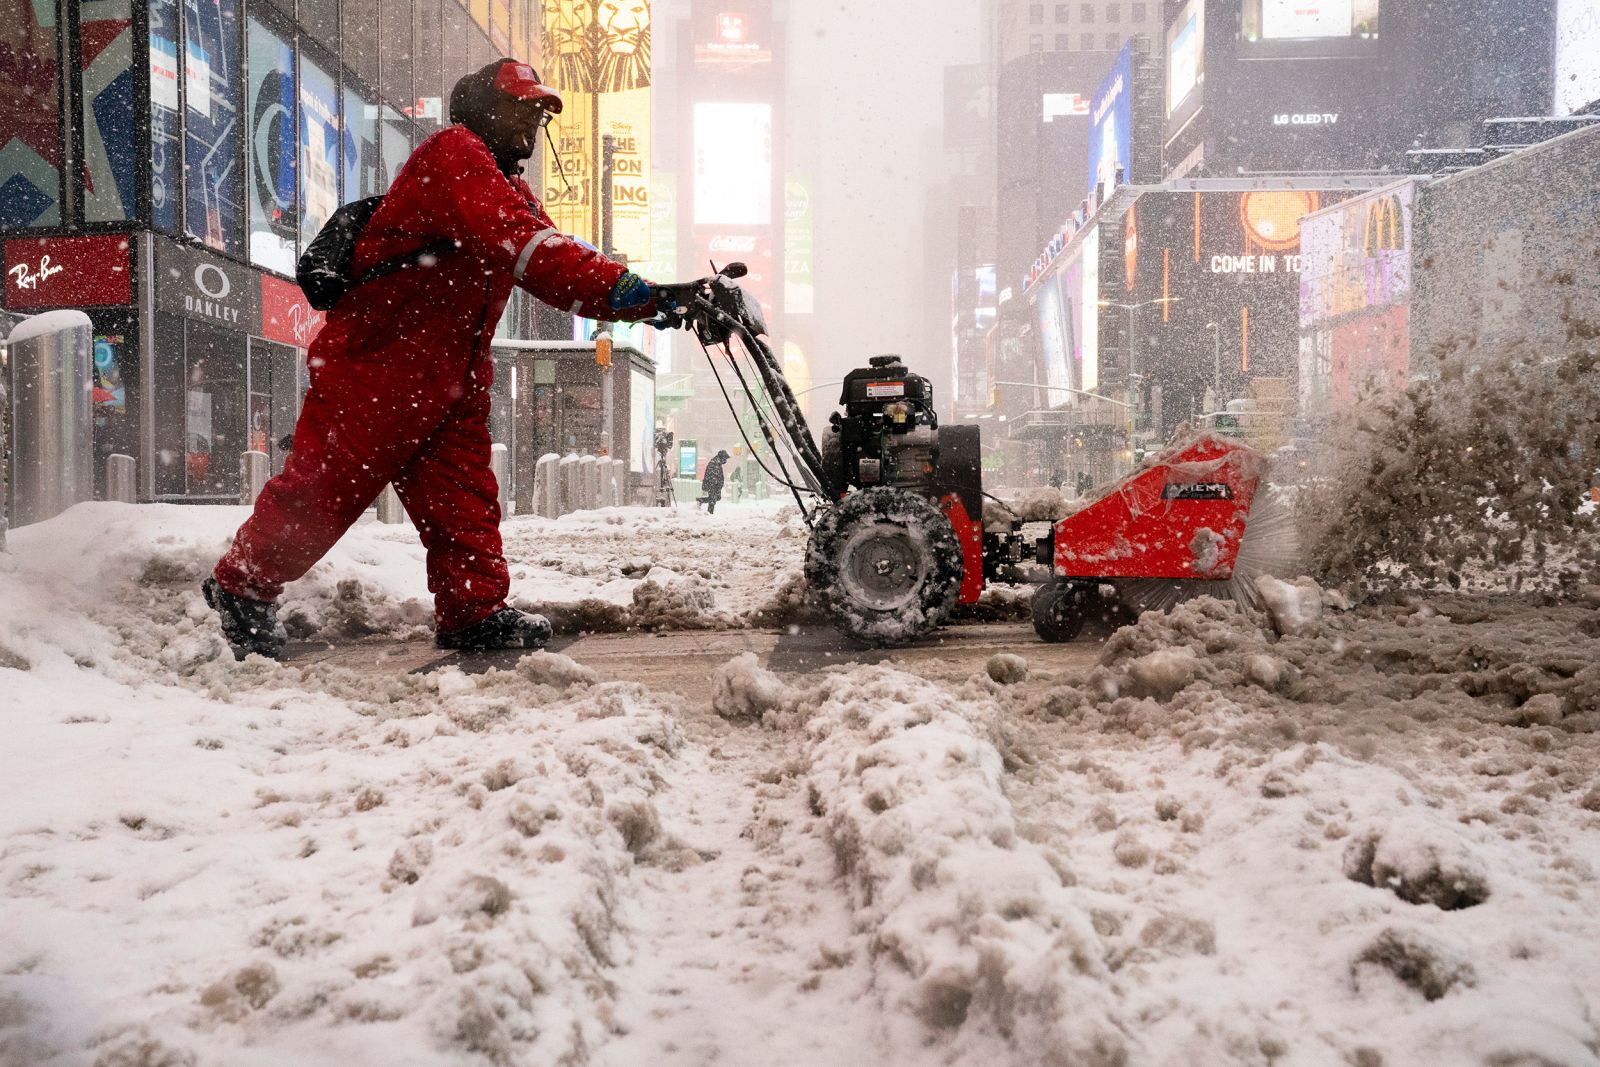 Fierce winter storm covers Northeast, with more snow expected Tuesday